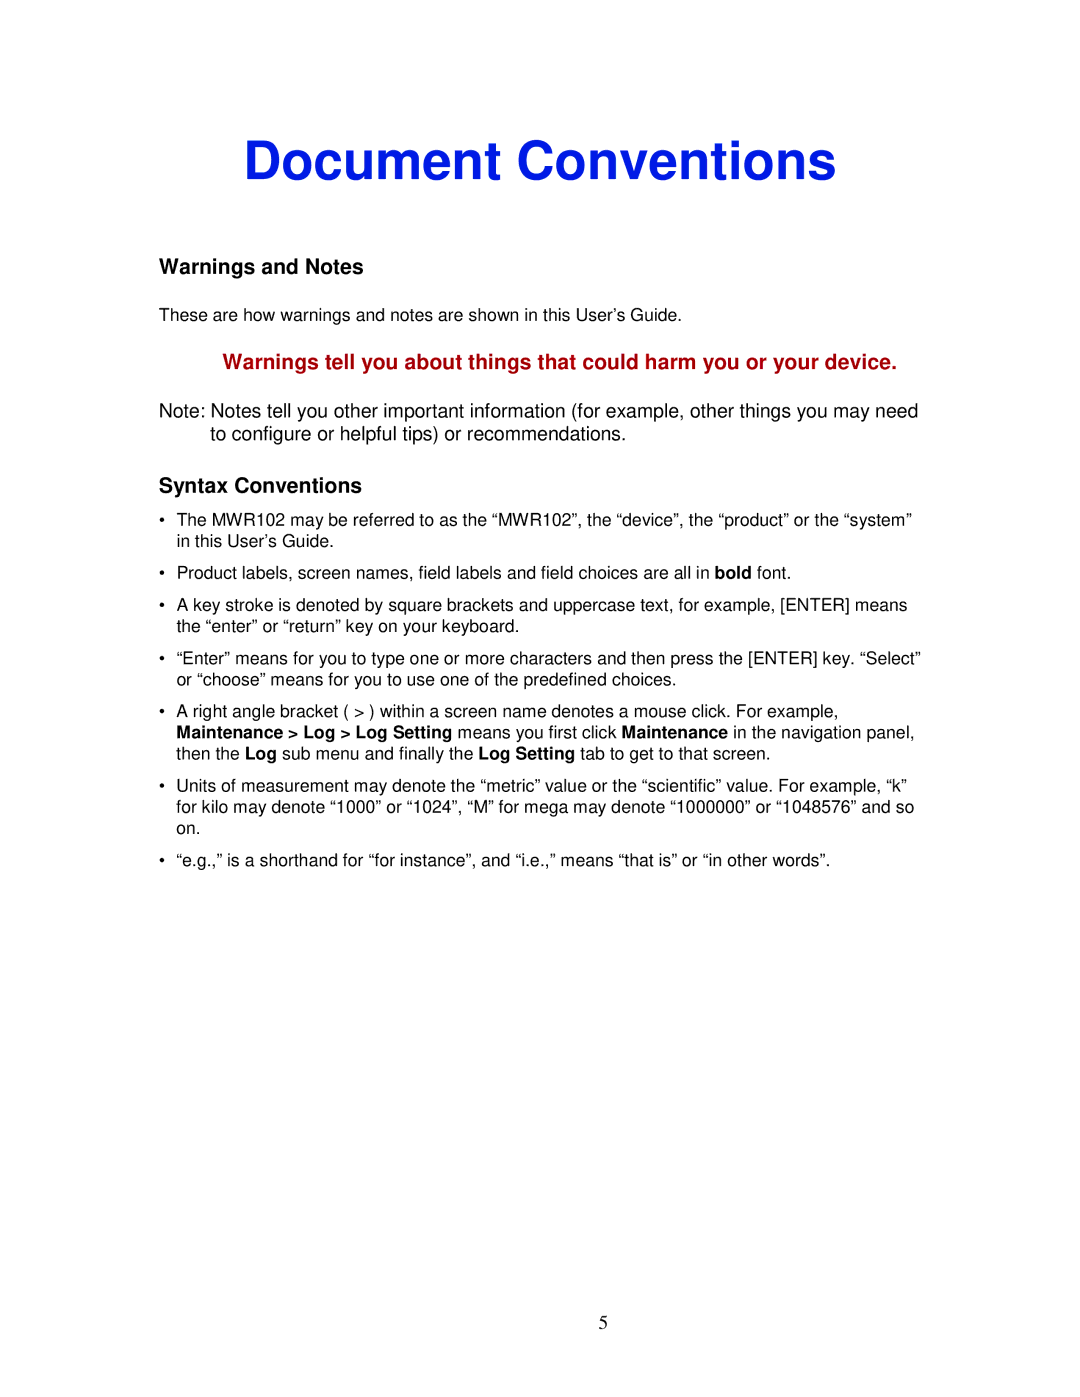 ZyXEL Communications MWR102 manual Document Conventions, Syntax Conventions 